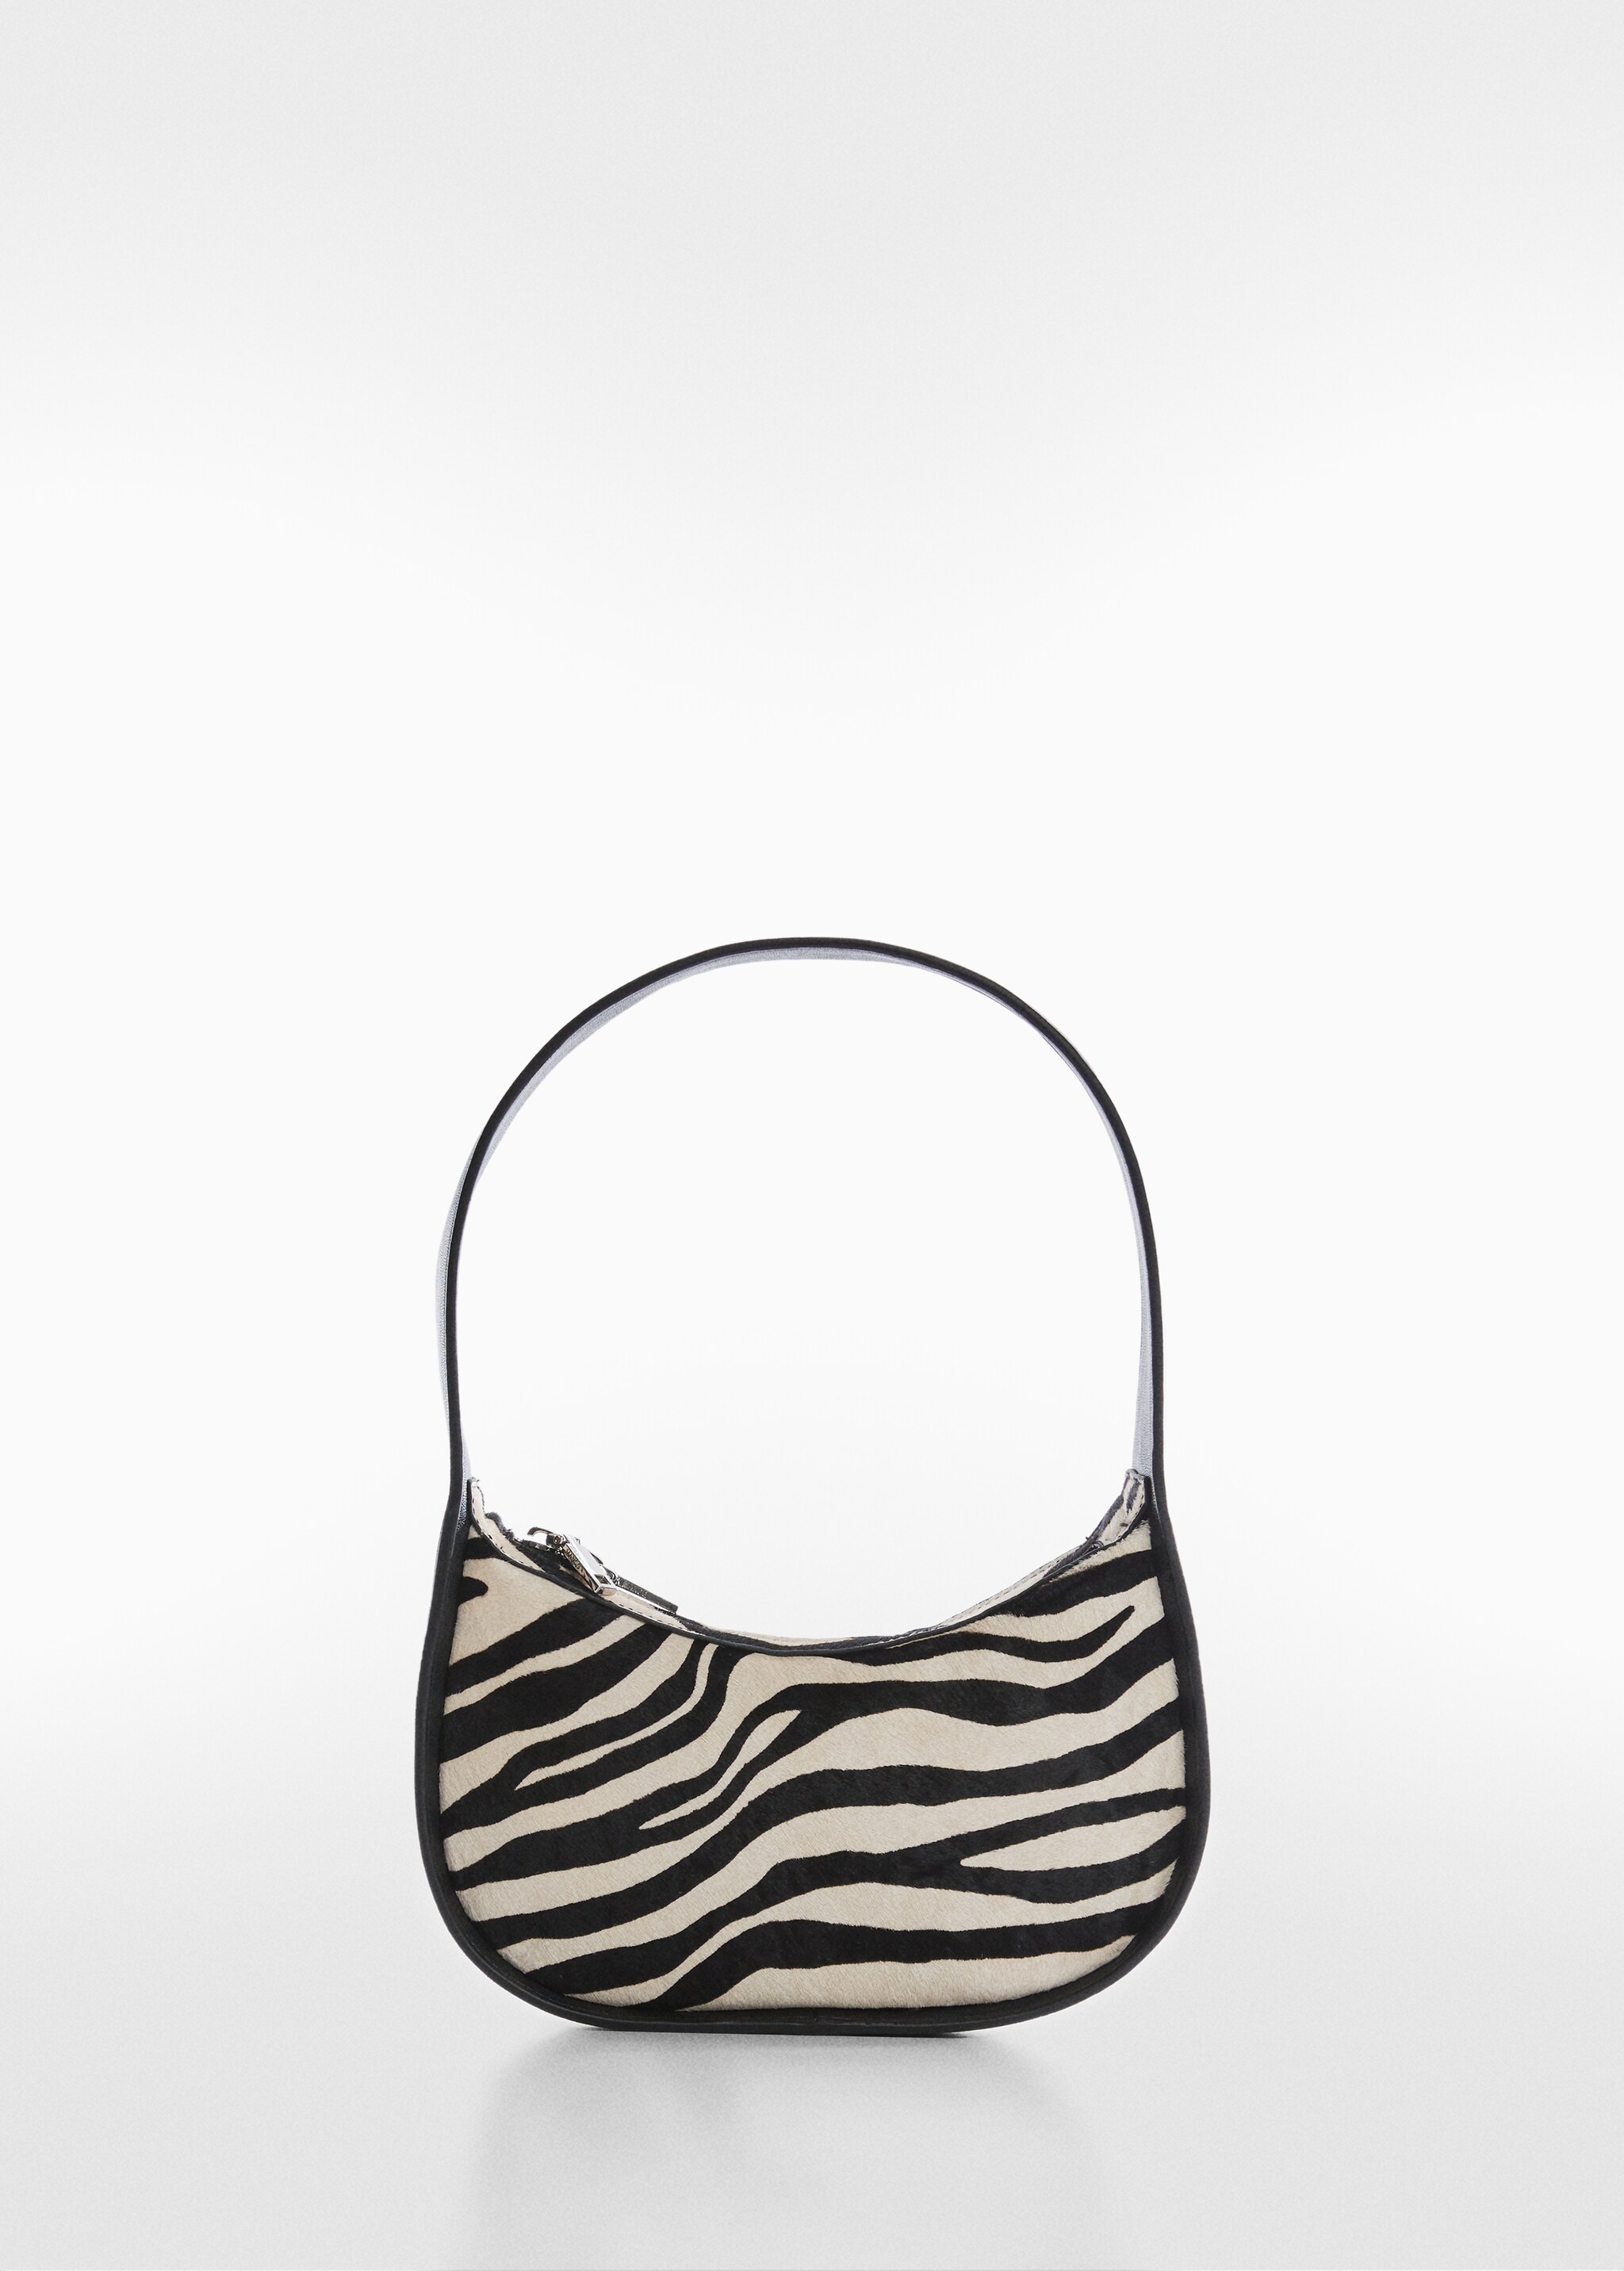 Animal print leather bag - Article without model